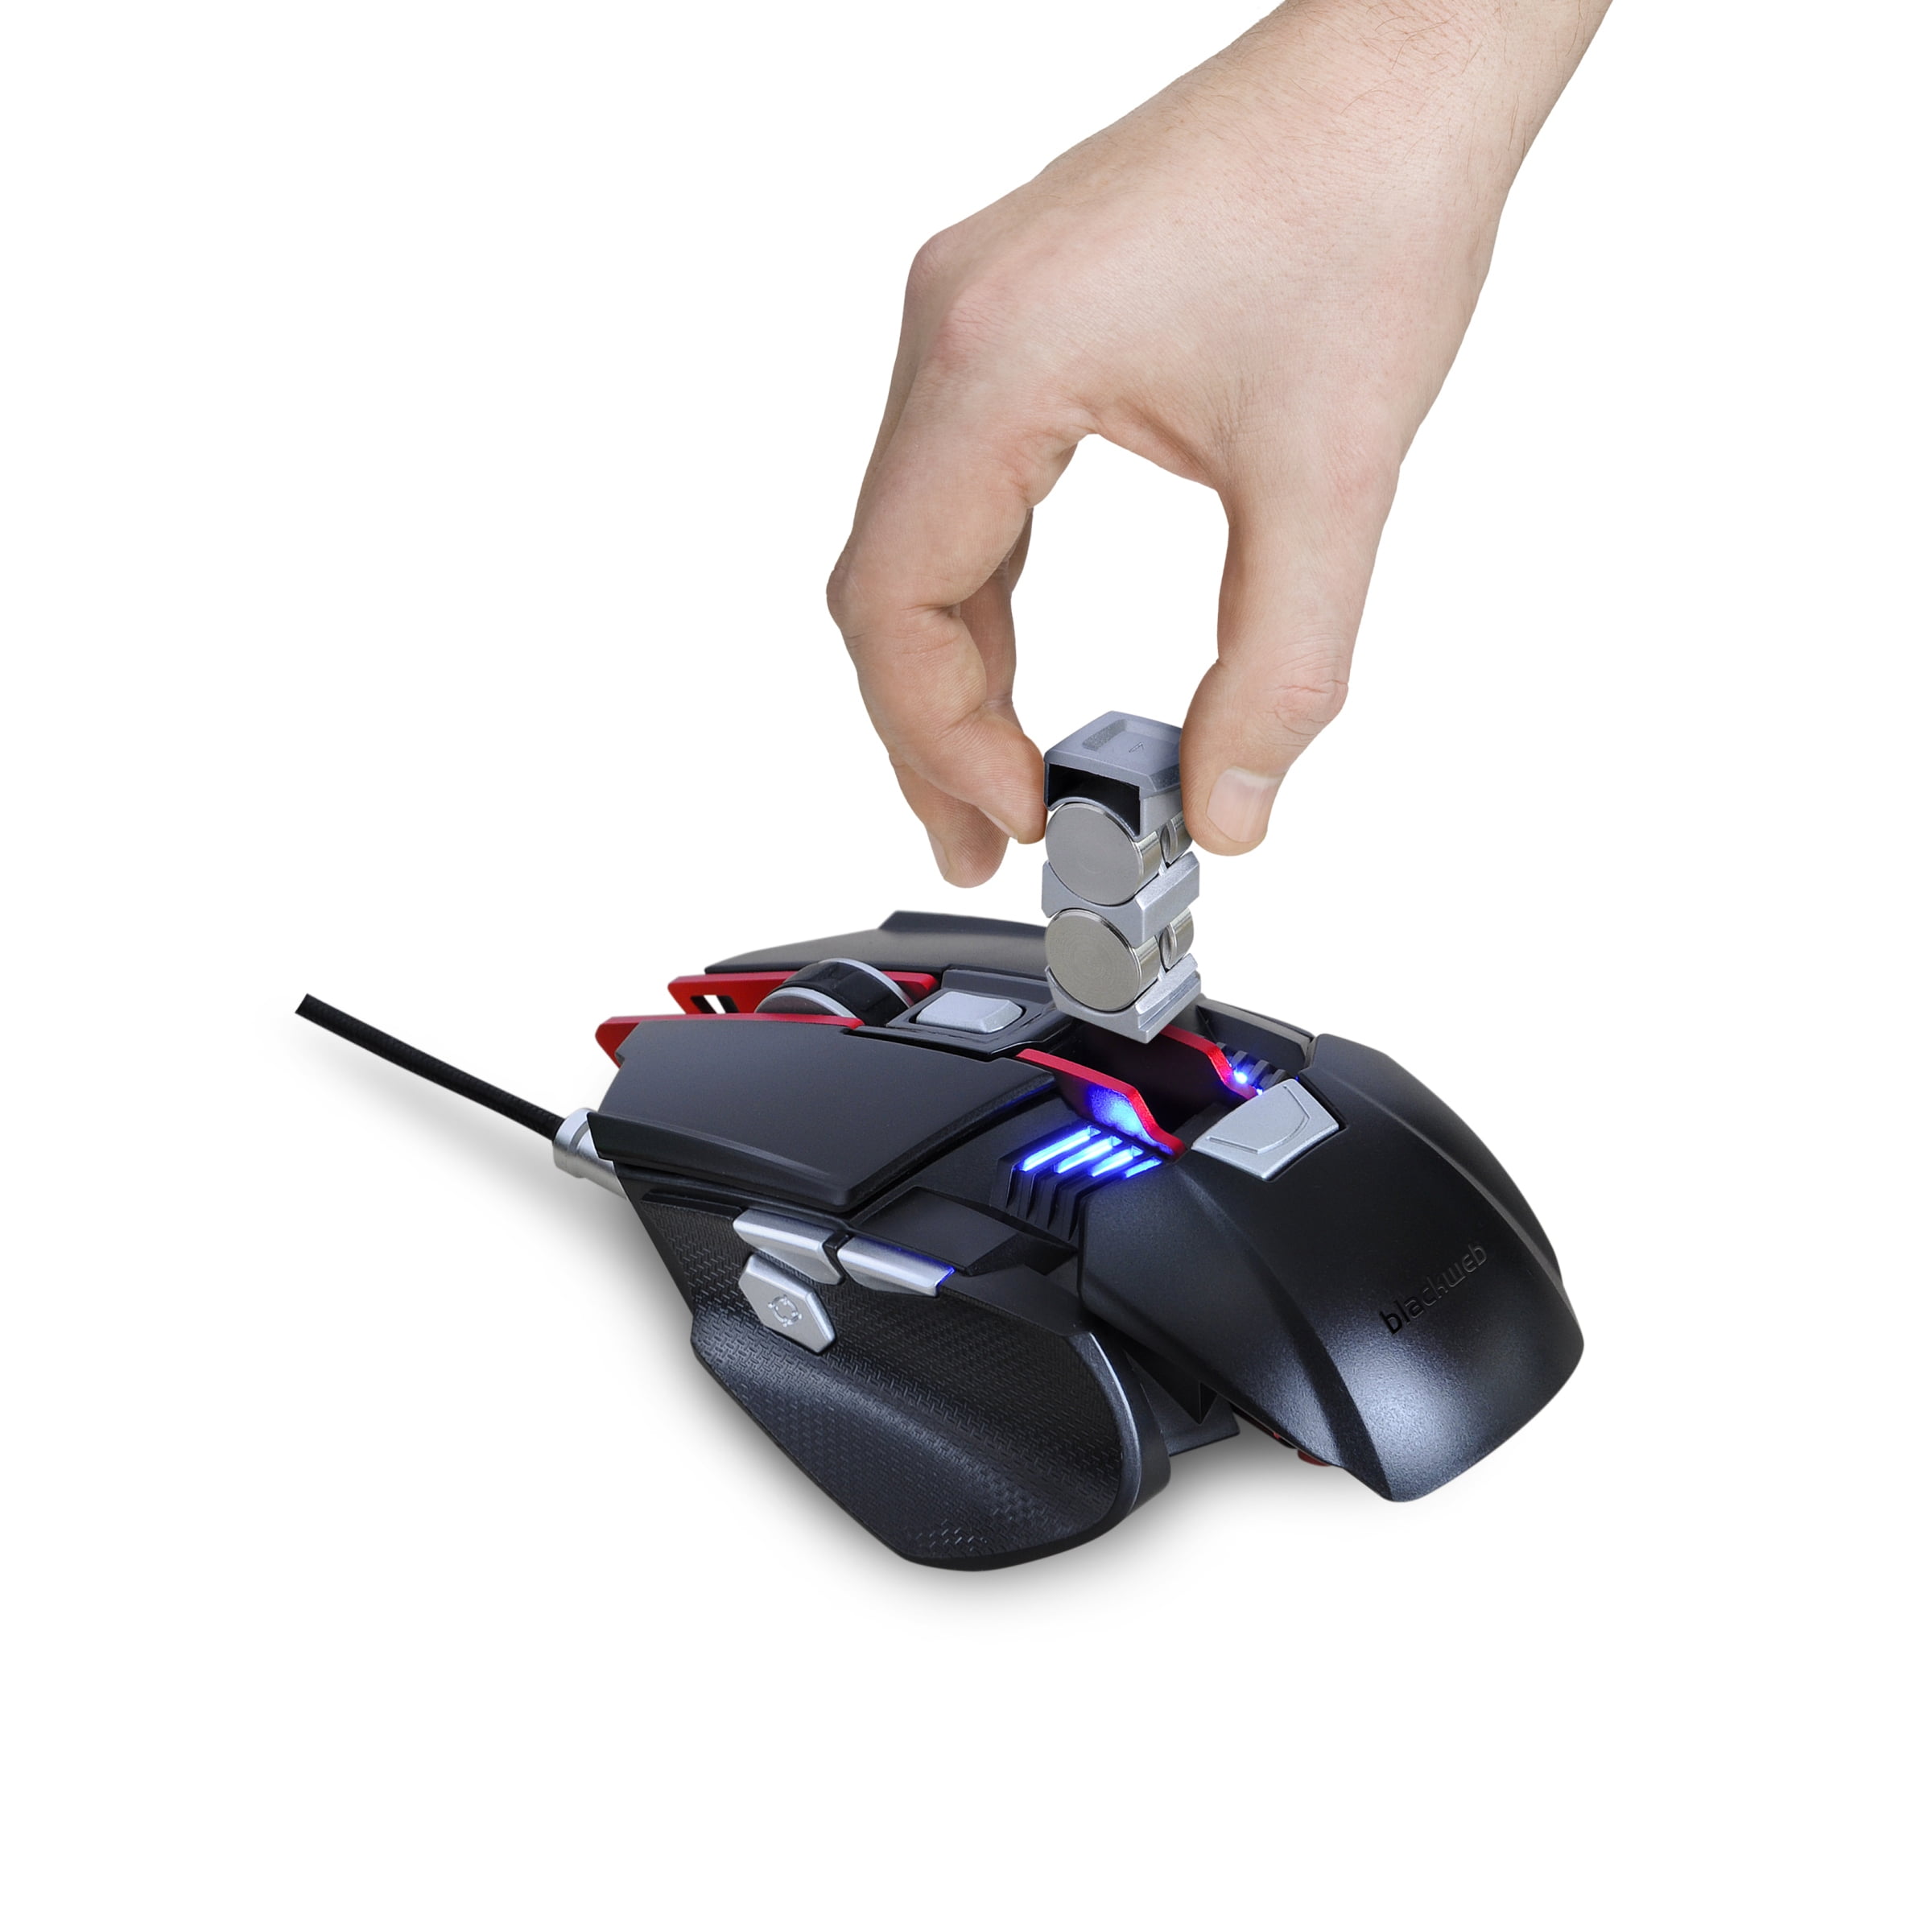 Black web gaming mouse how to change color